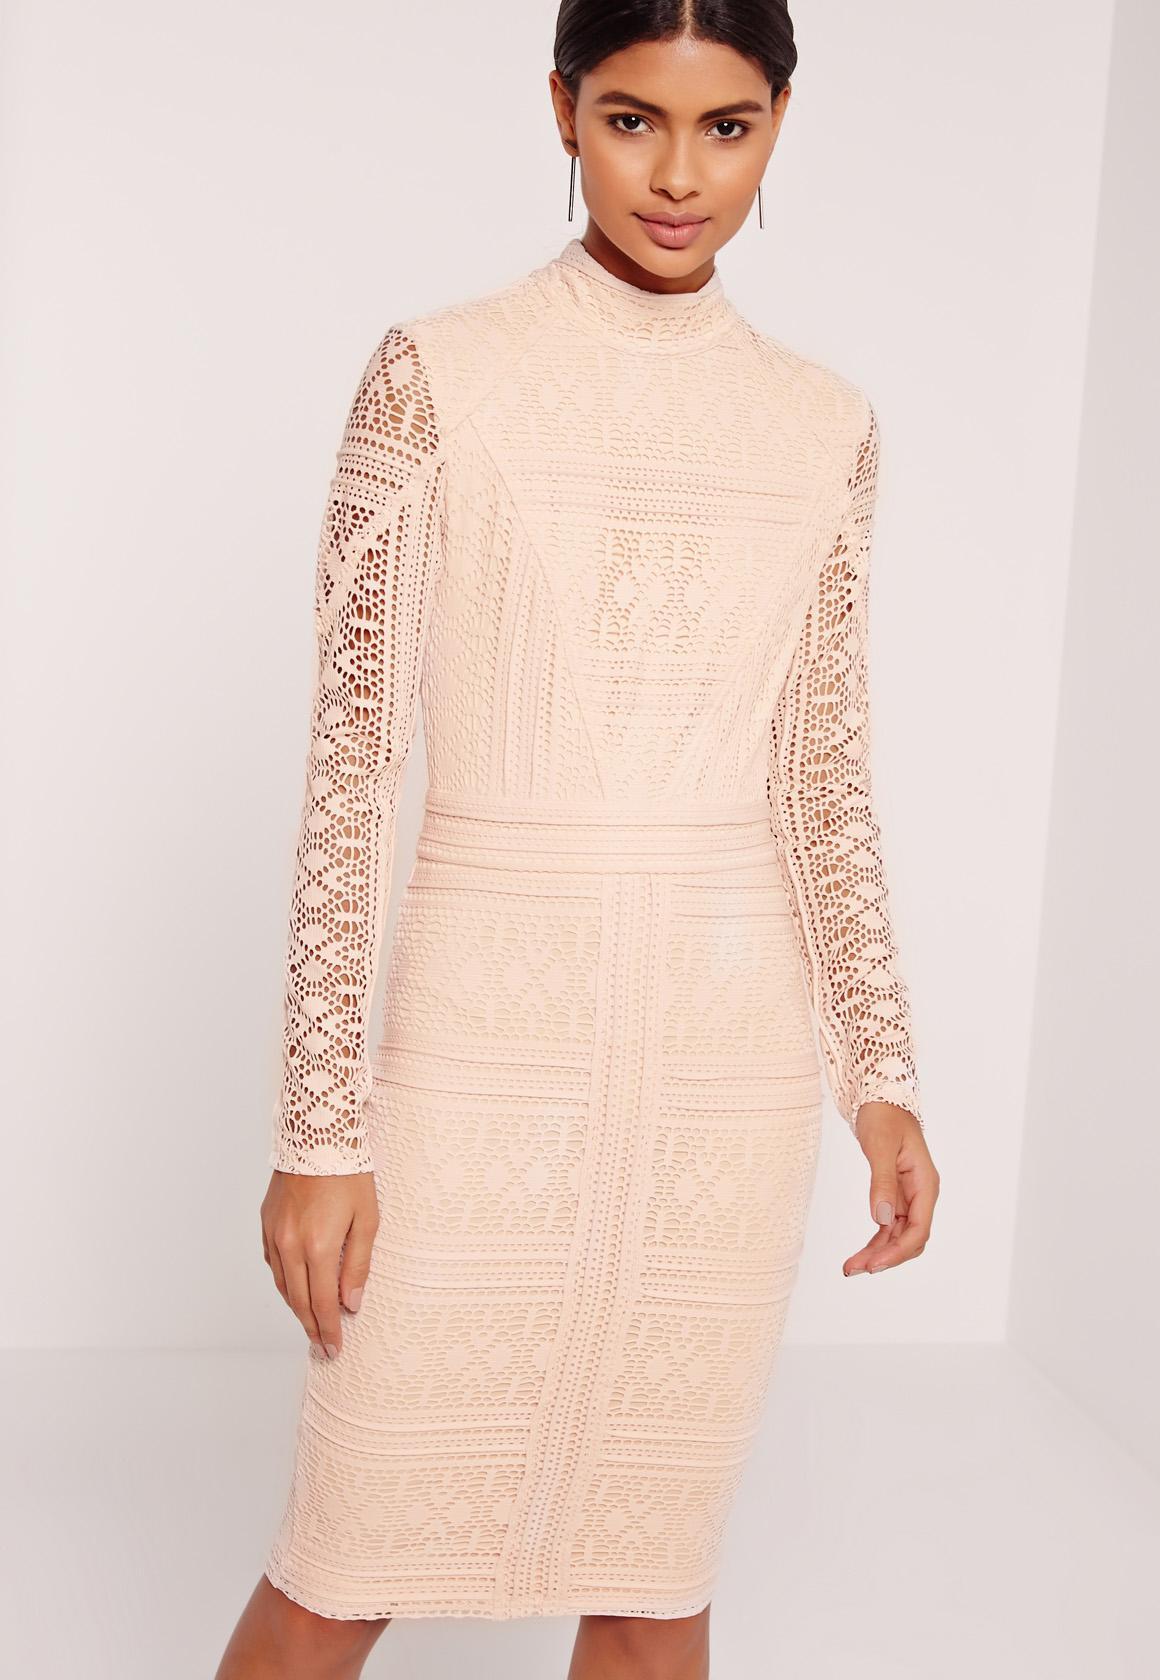 Lyst - Missguided Lace Long Sleeve High Neck Midi Dress Nude in Blue